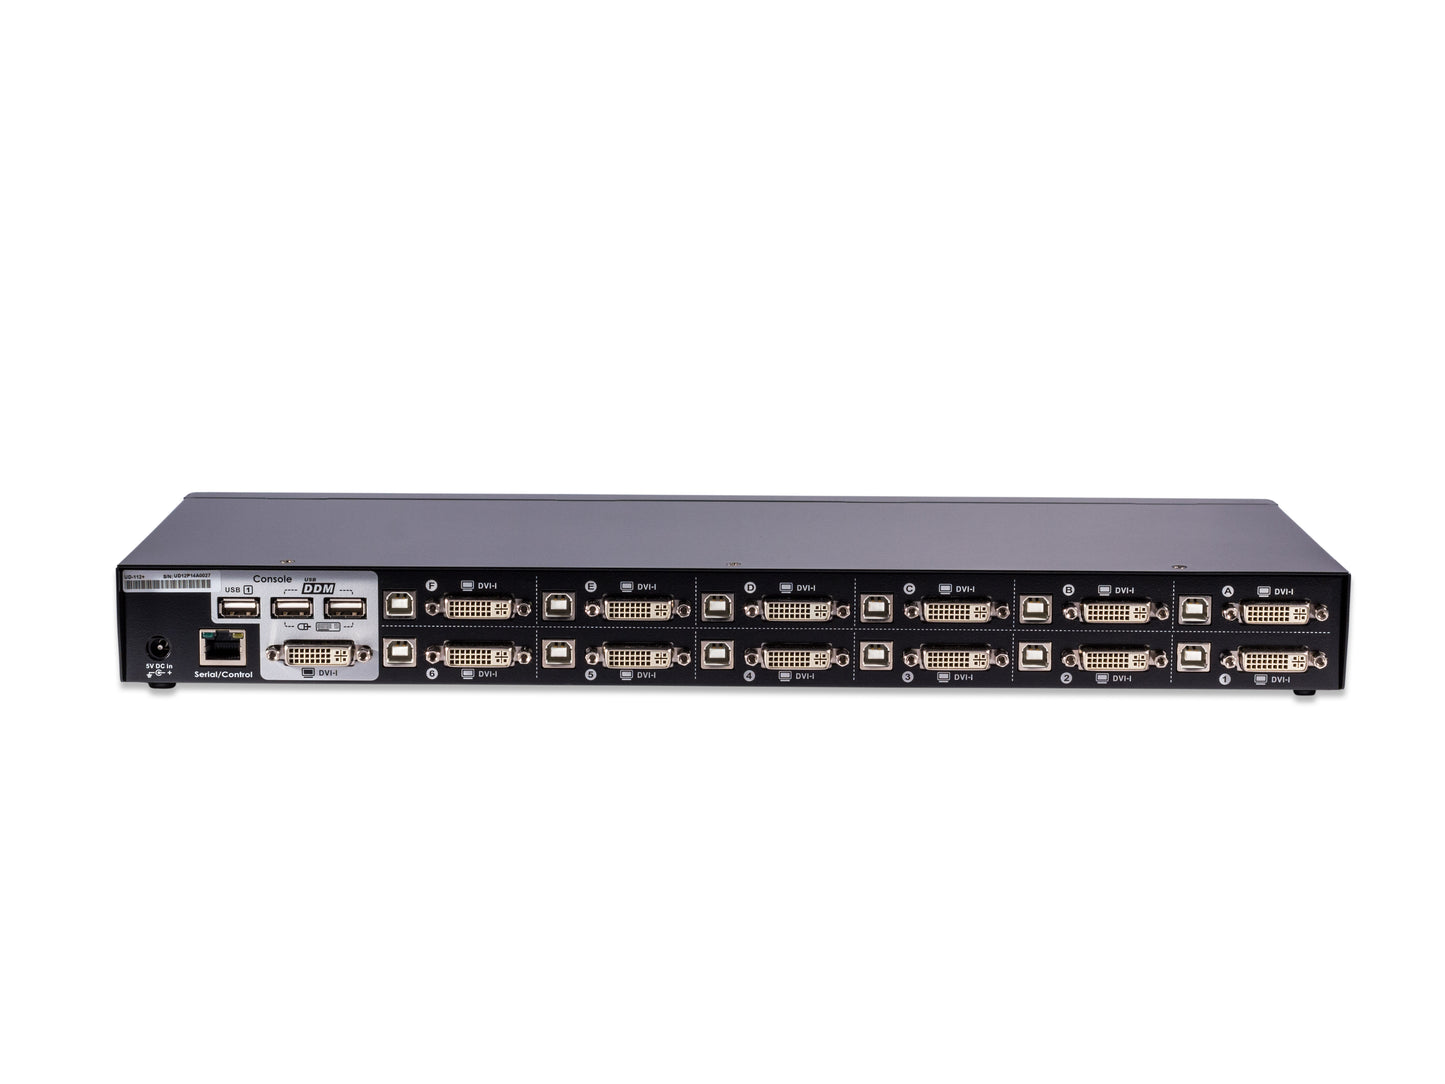 UD-112+ DVI-D KVM switch for 1 Monitor and 12 Computers